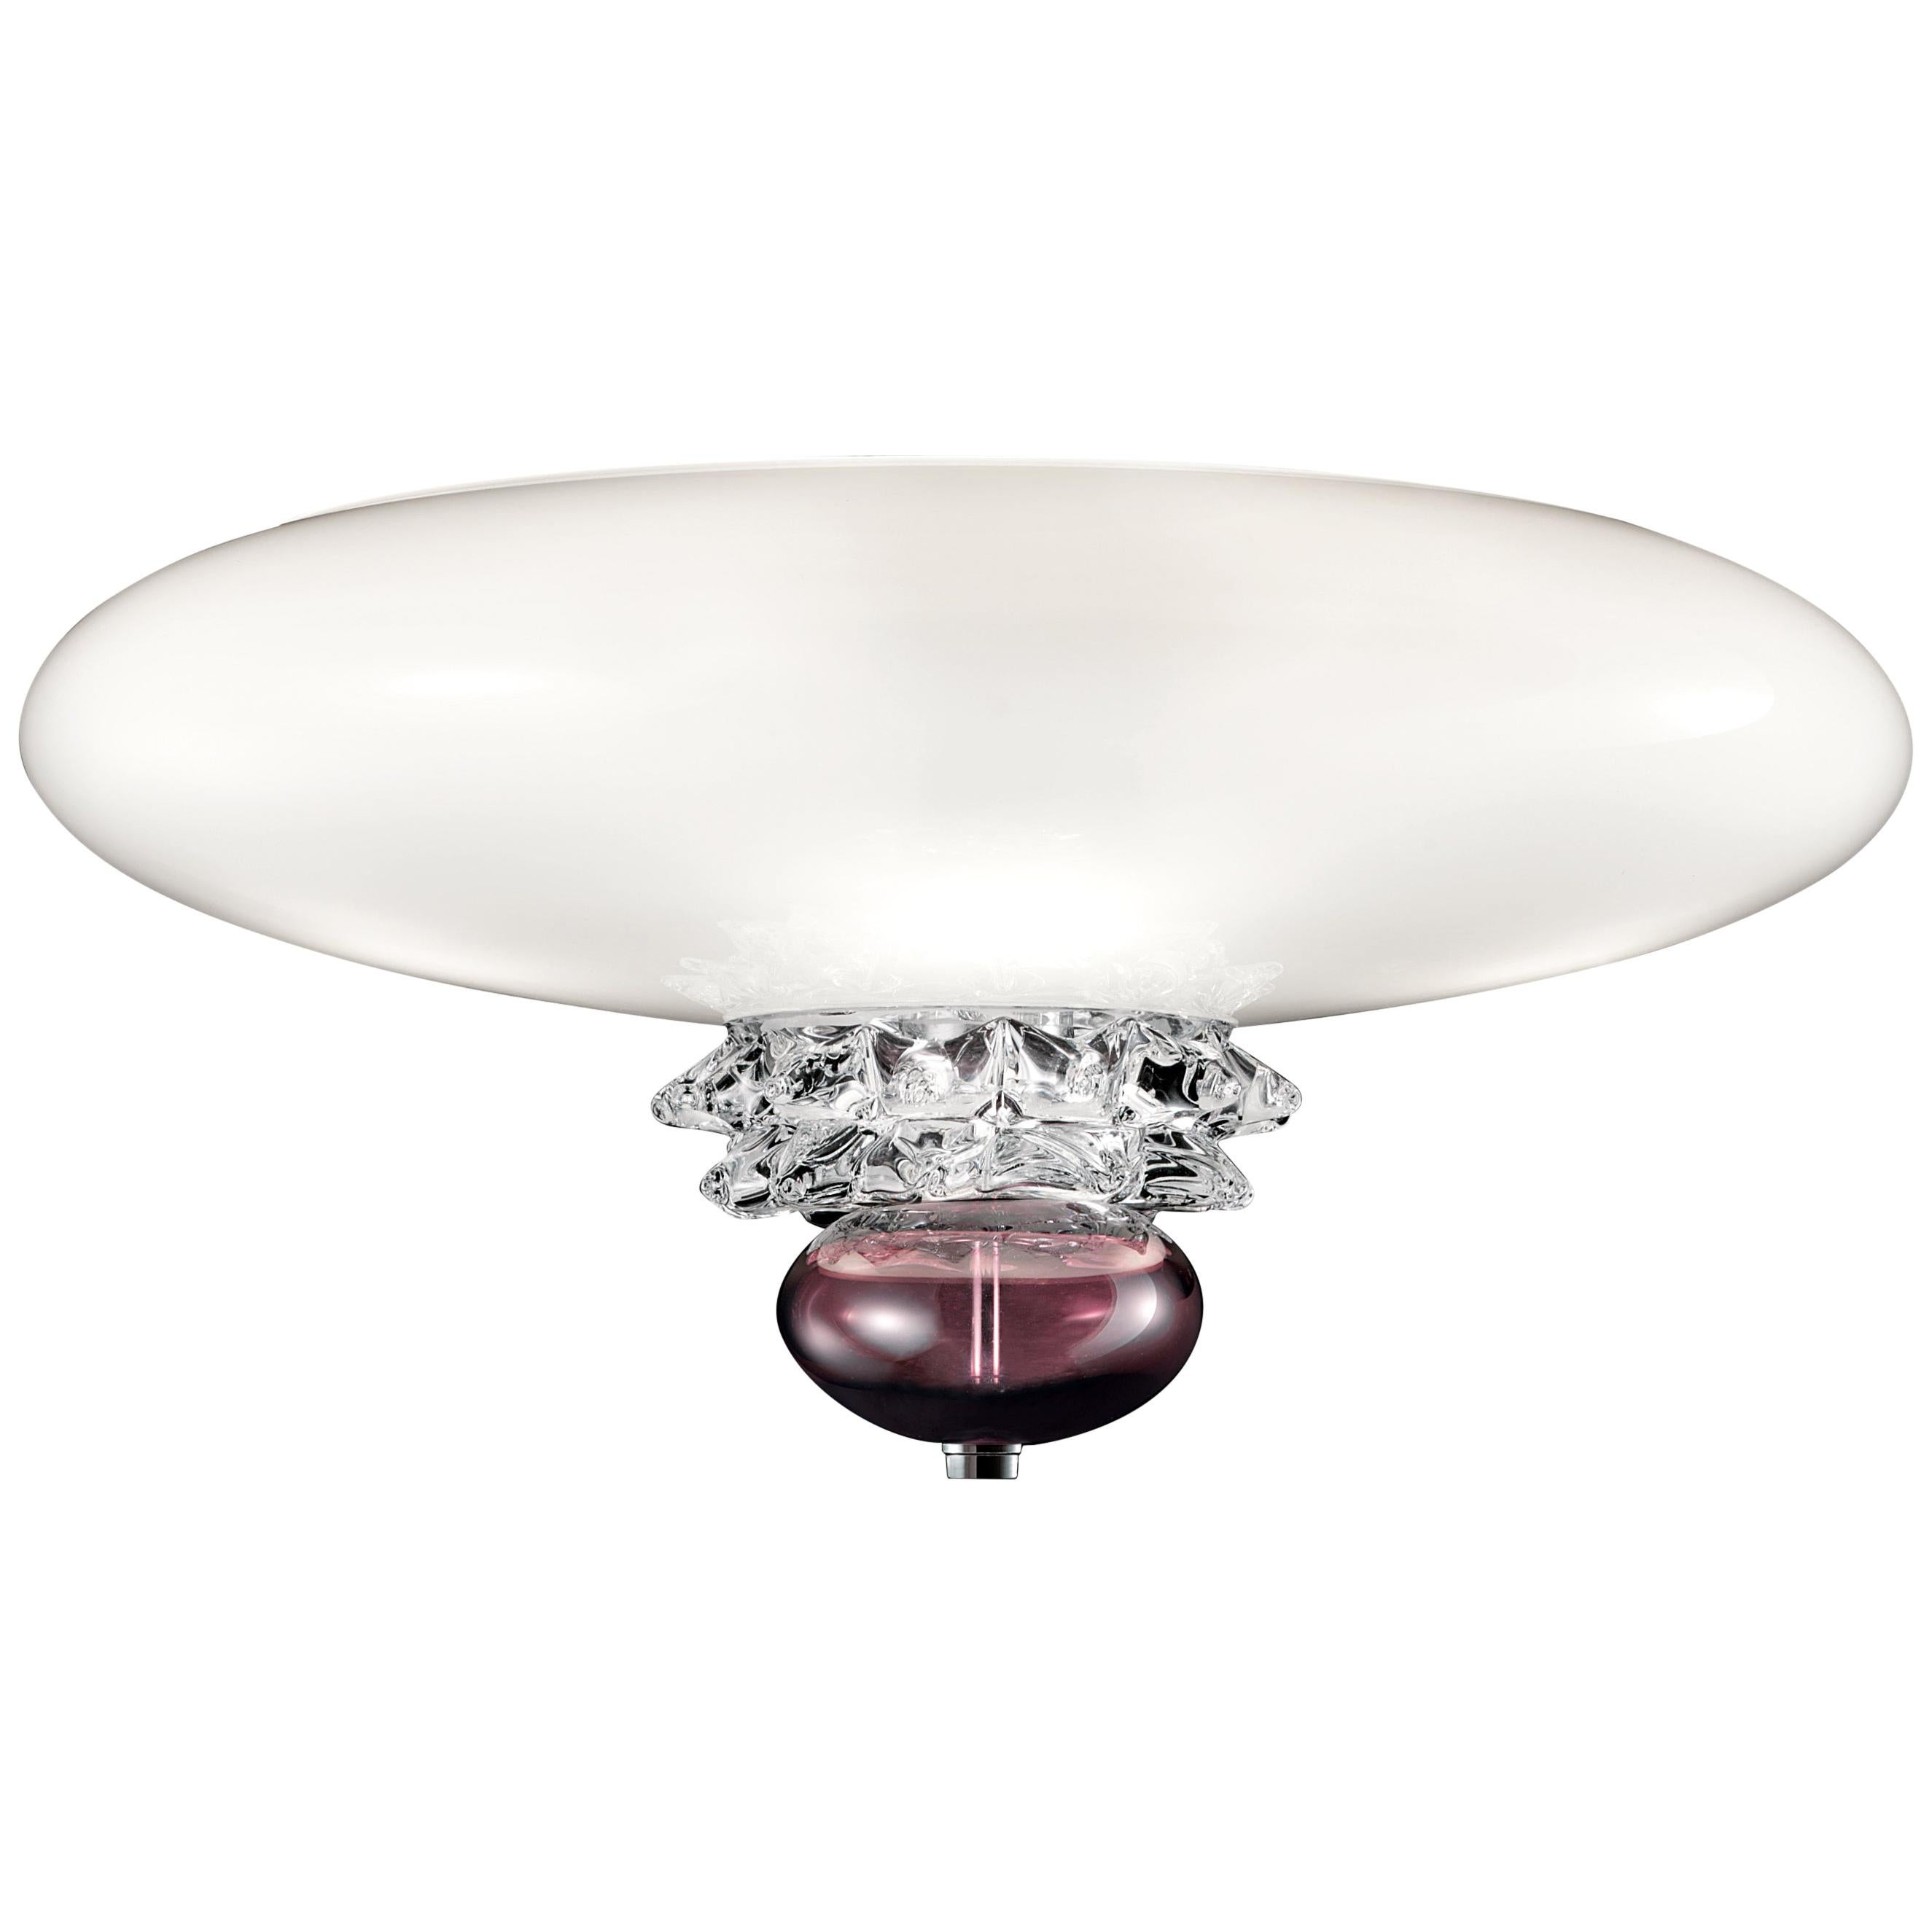 Purple (Violet/White_AJ) Anversa 5699 Wall Sconce in Chrome and Glass, by Barovier&Toso